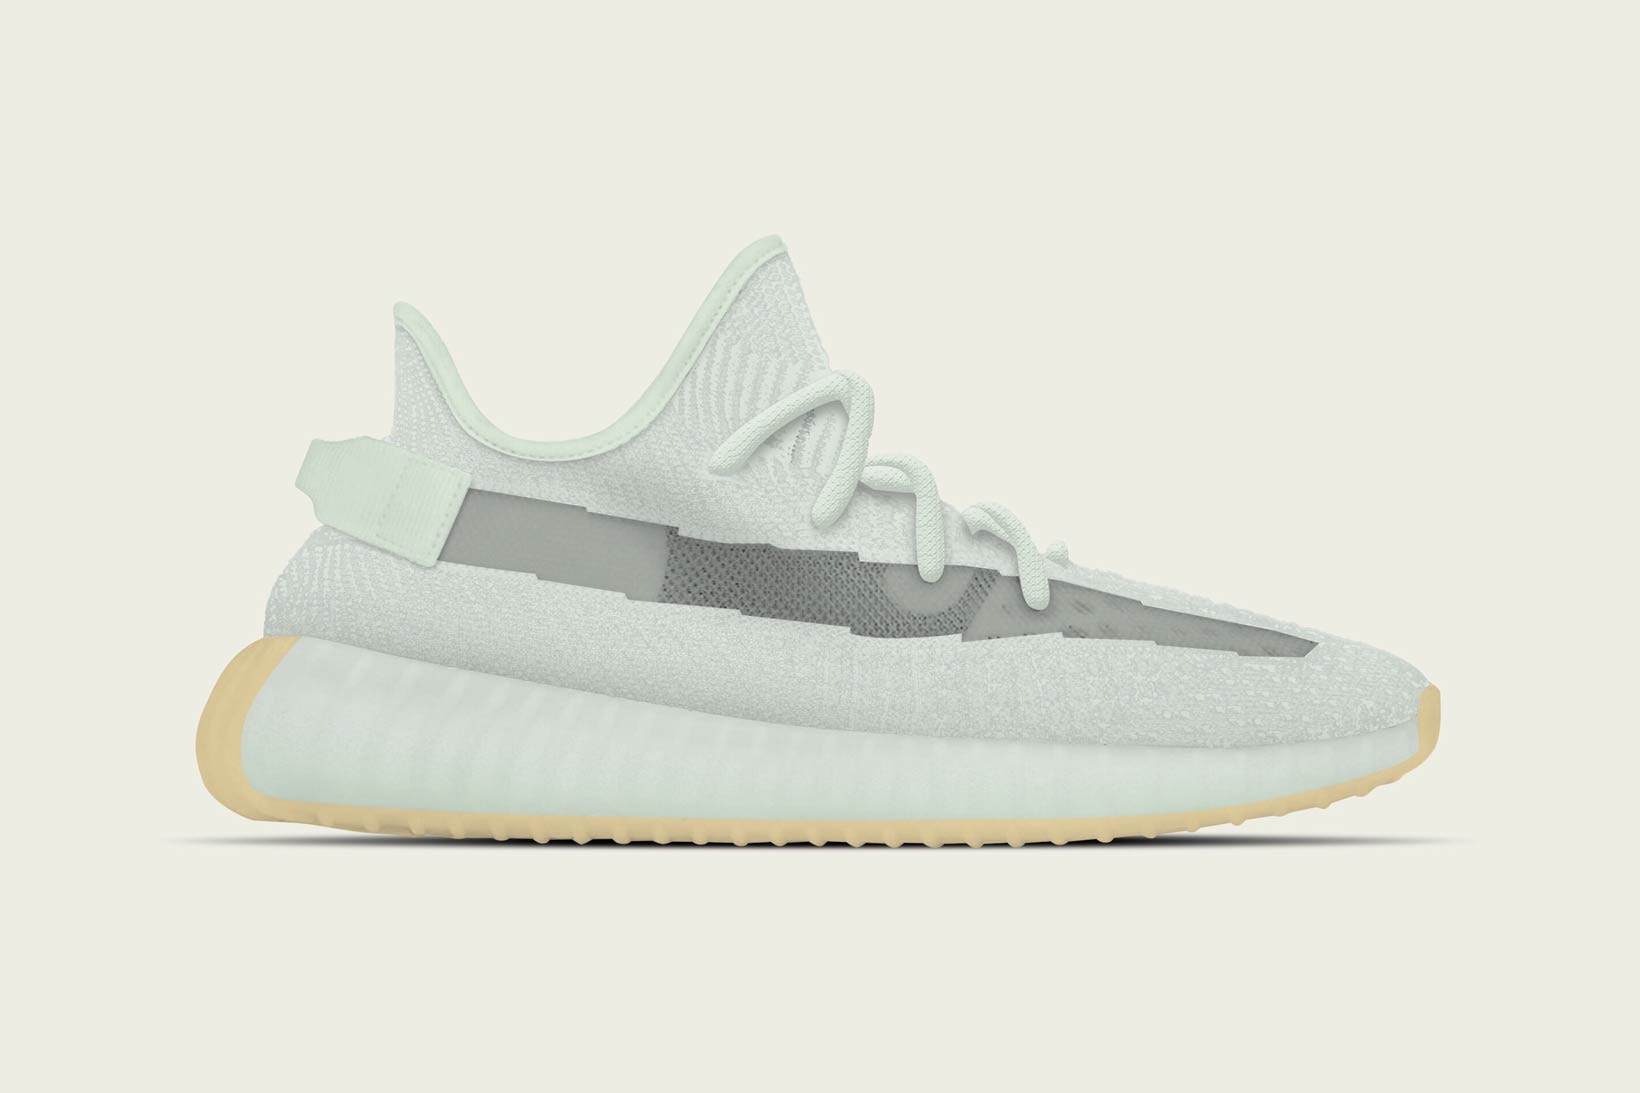 adidas Kanye West YEEZY BOOST 350 V2 Hyperspace